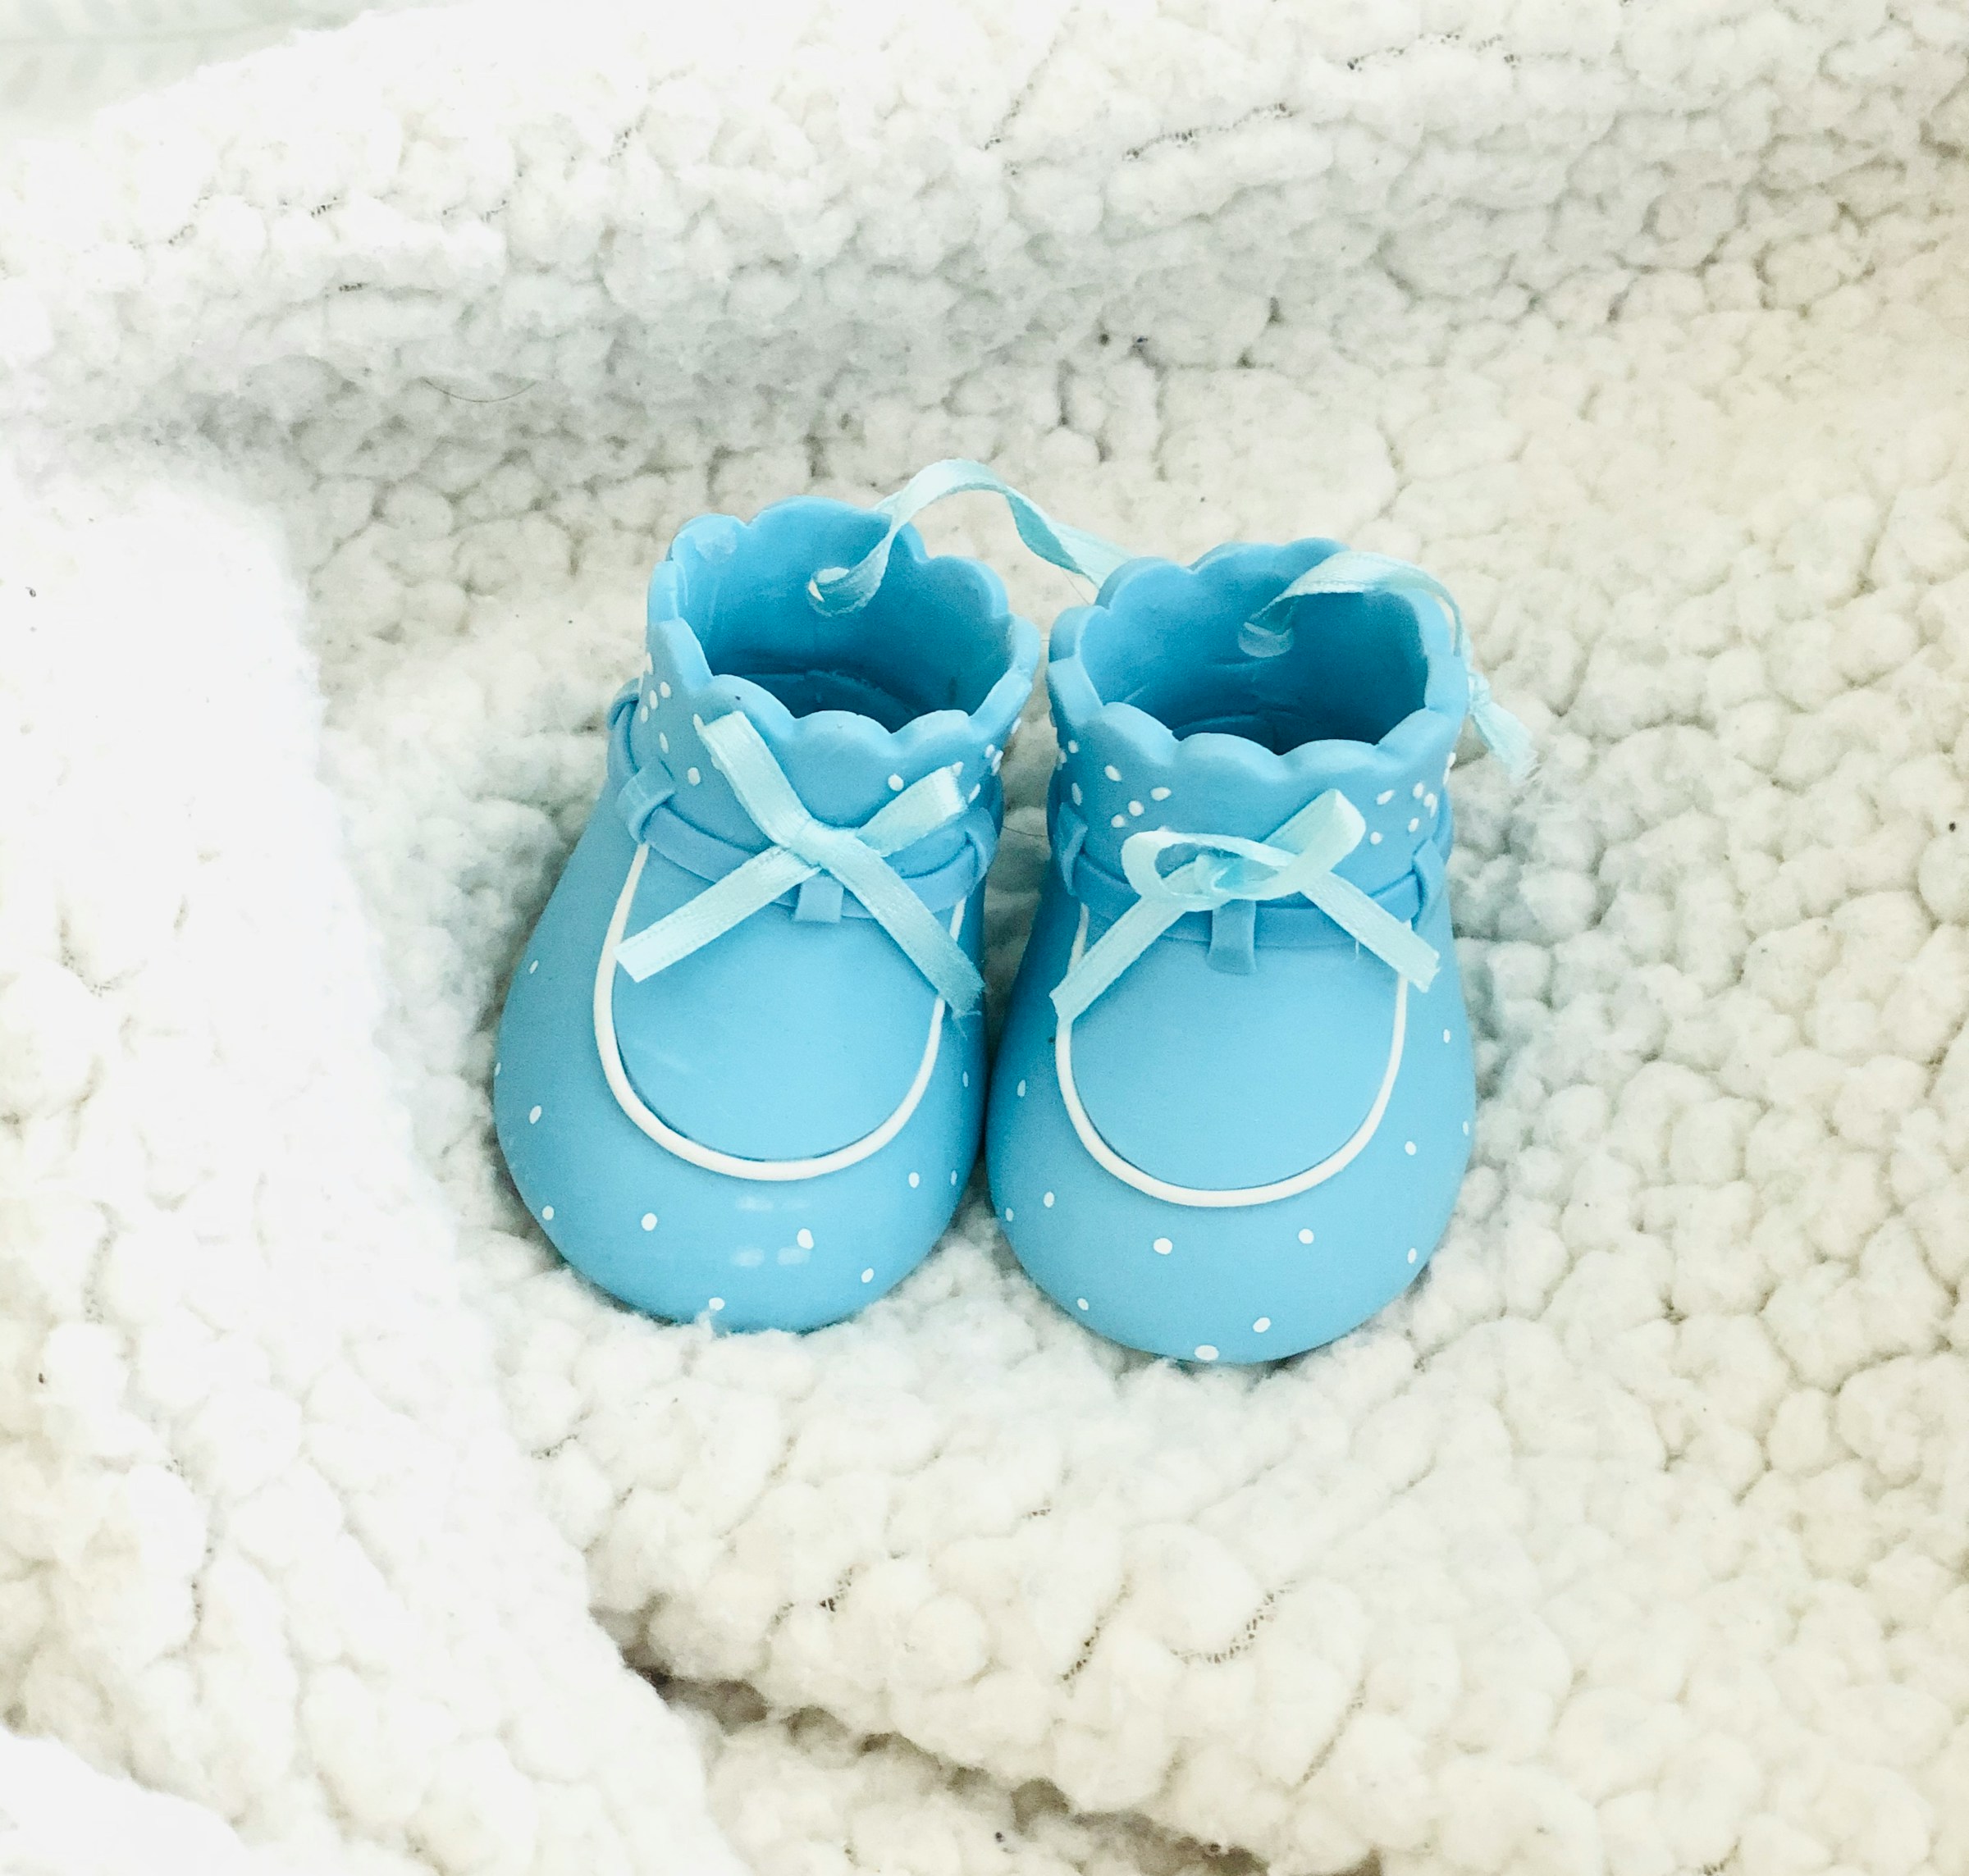 A pair of blue baby shoes | Source: Unsplash